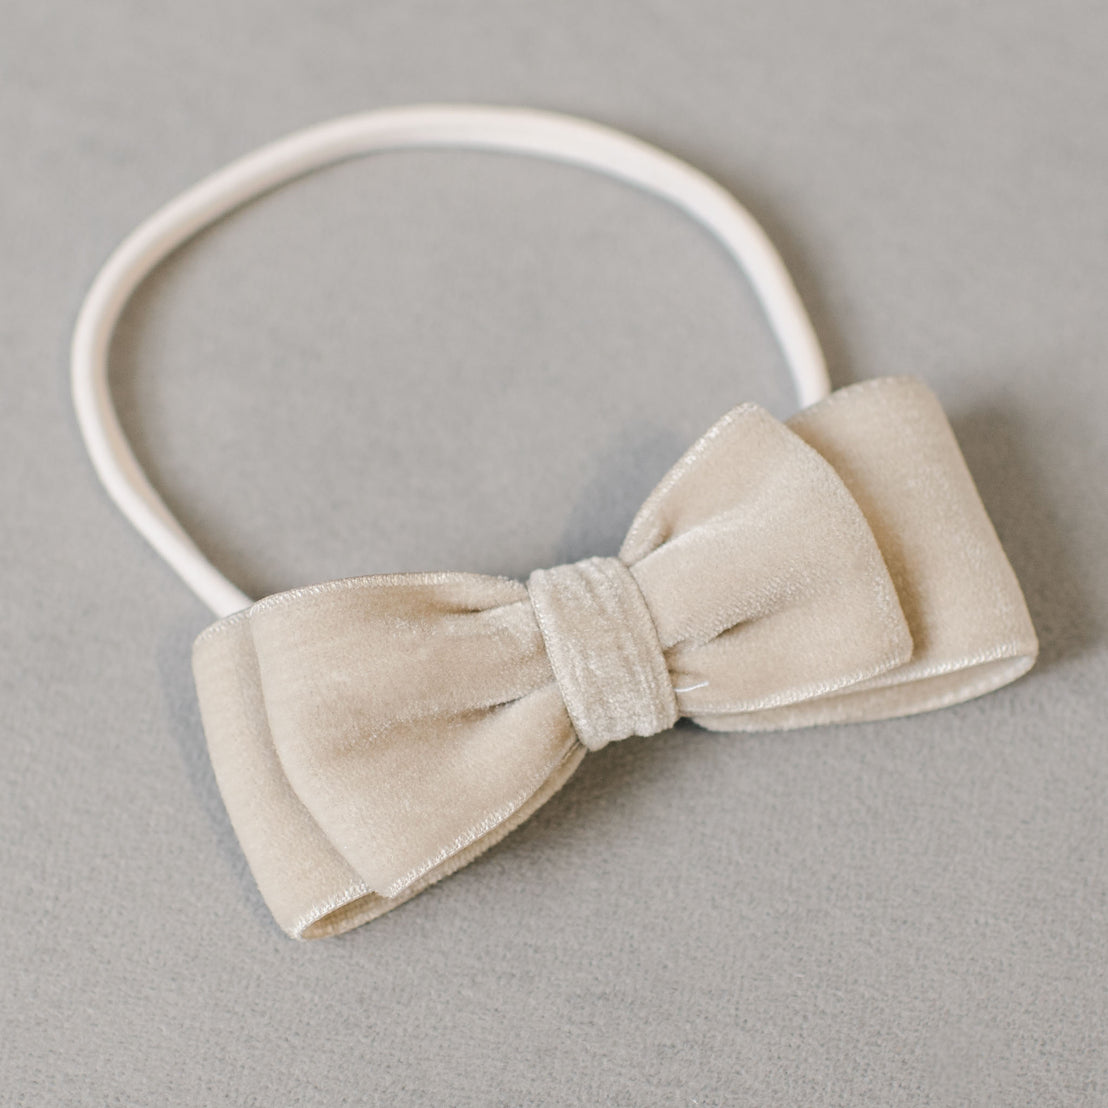 An elegant Grace Velvet Bow Headband on a hand-stretched nylon band, displayed on a gray background.